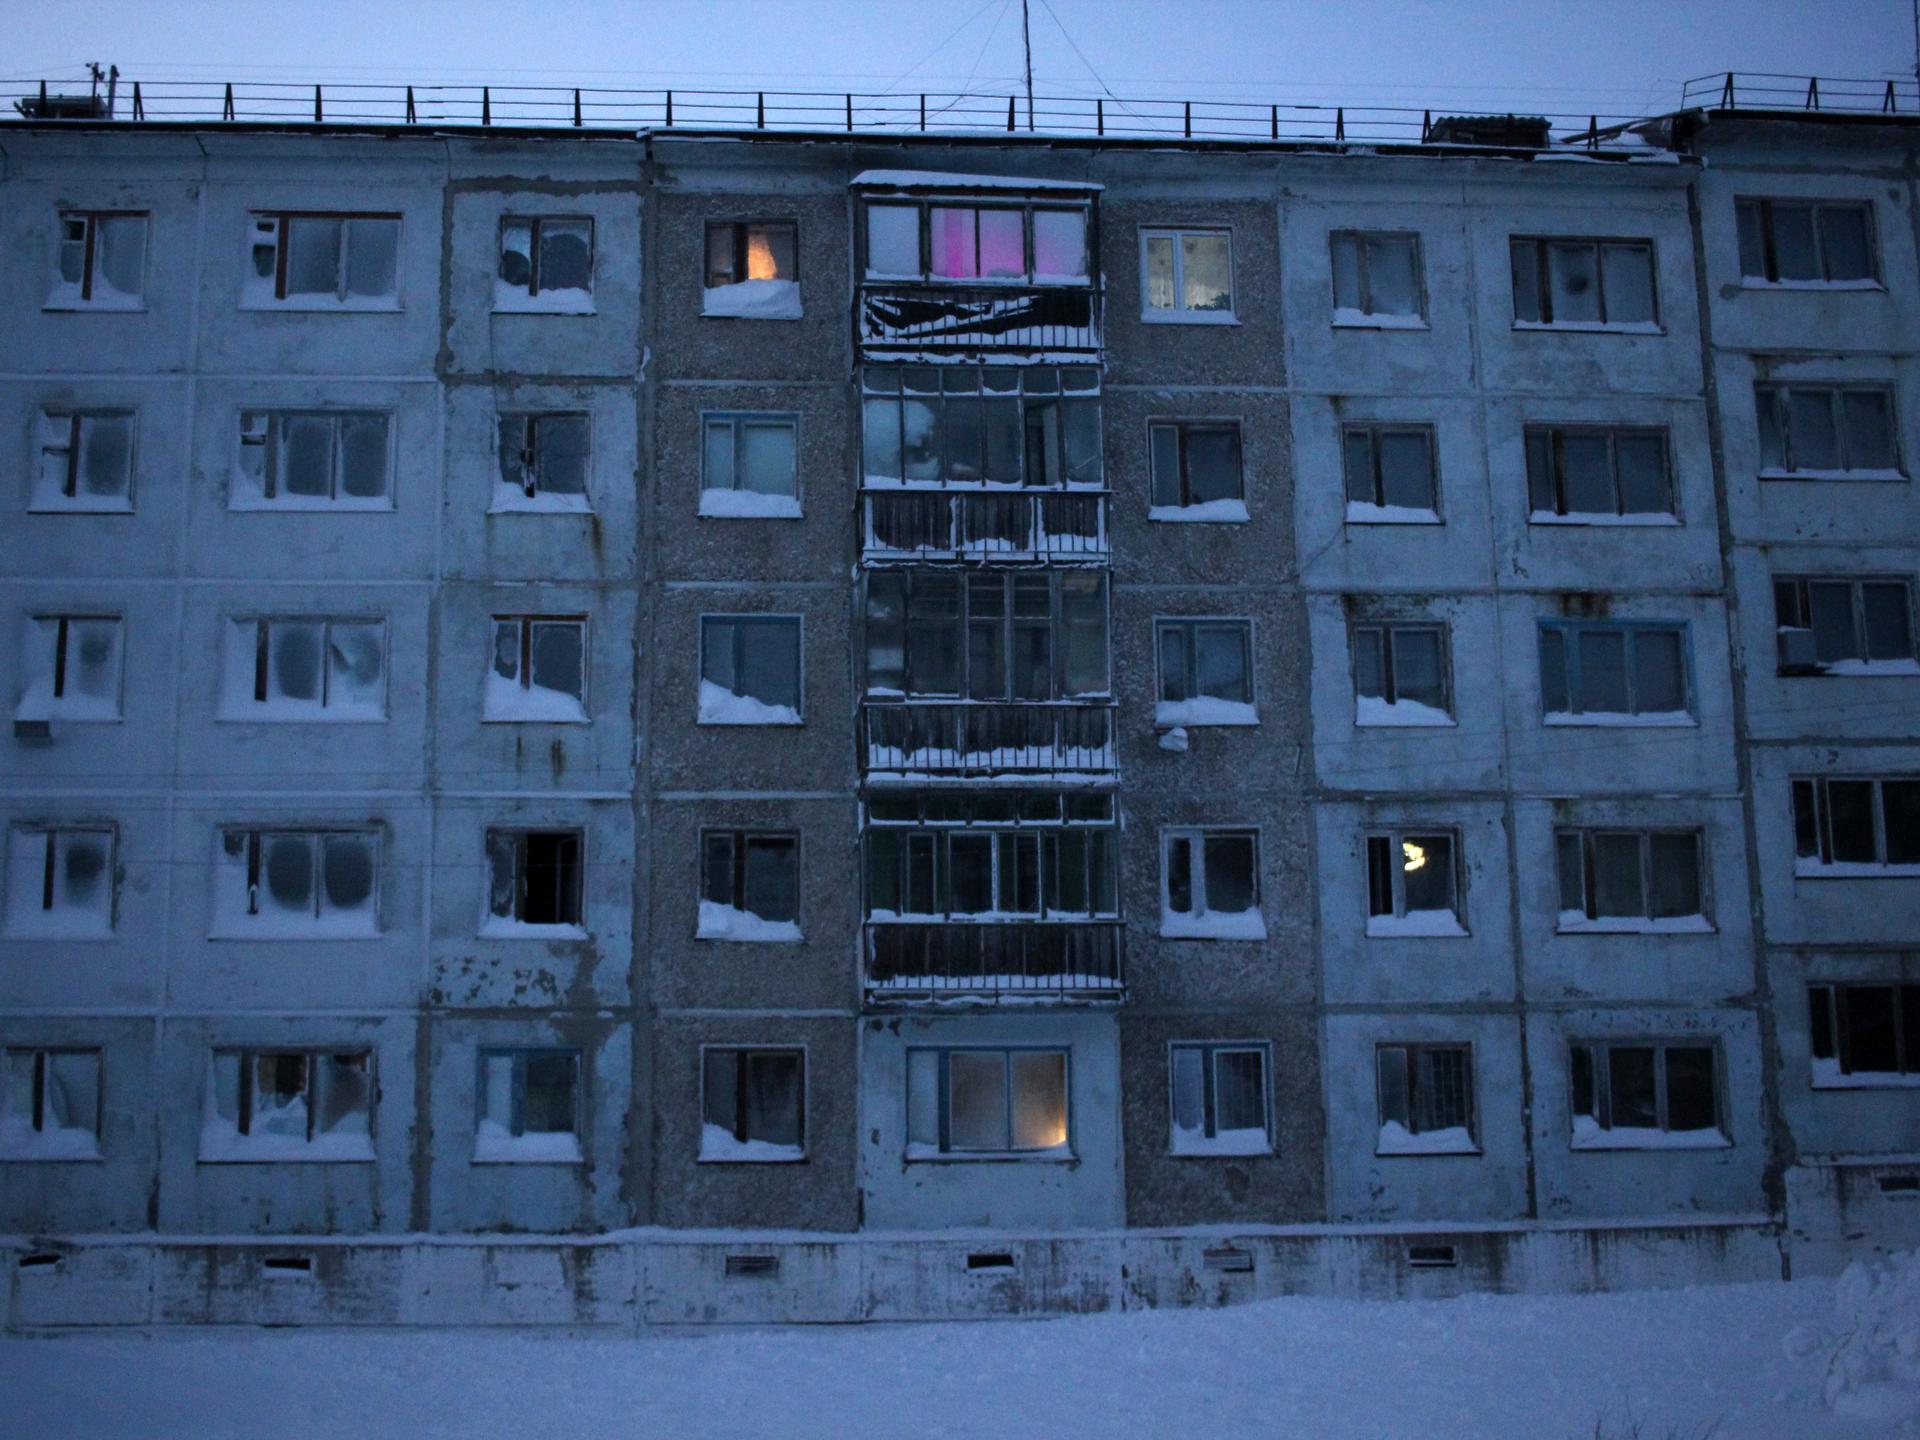 A block of Soviet-style apartments